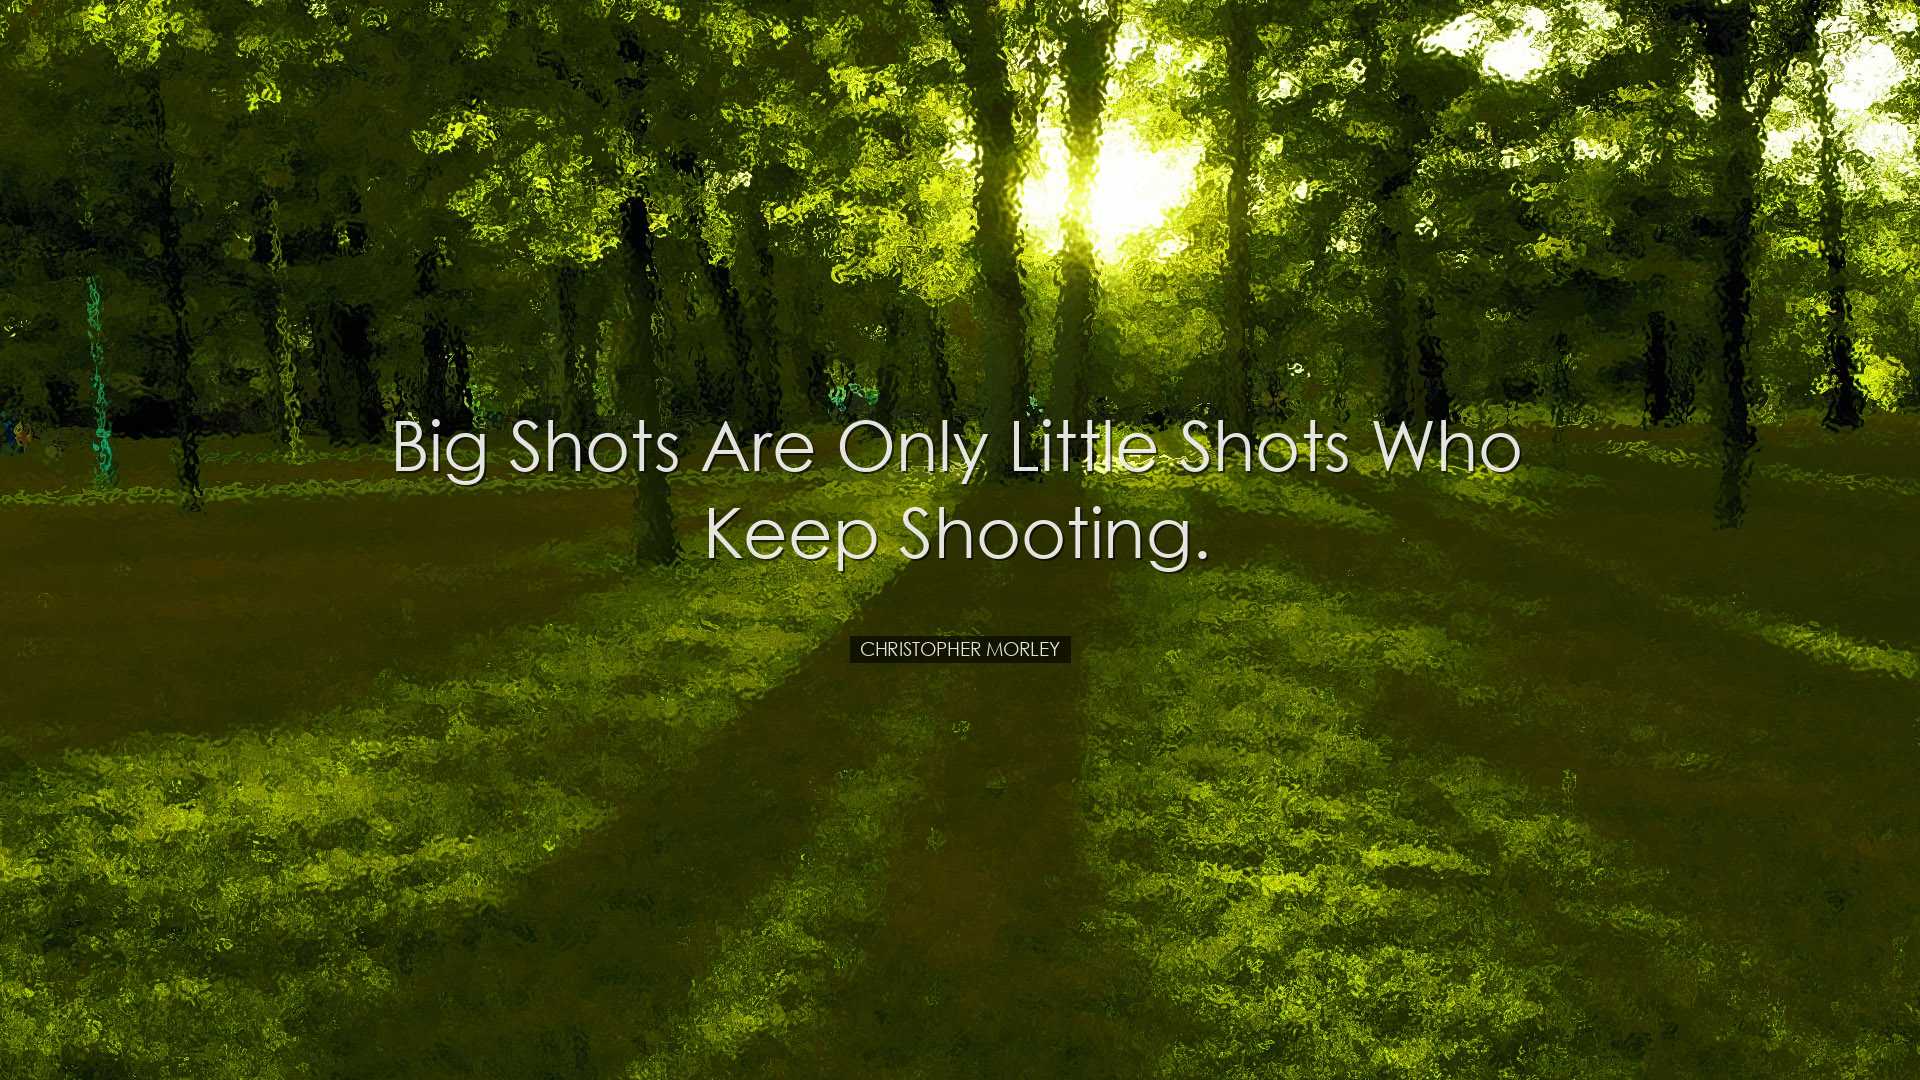 Big shots are only little shots who keep shooting. - Christopher M